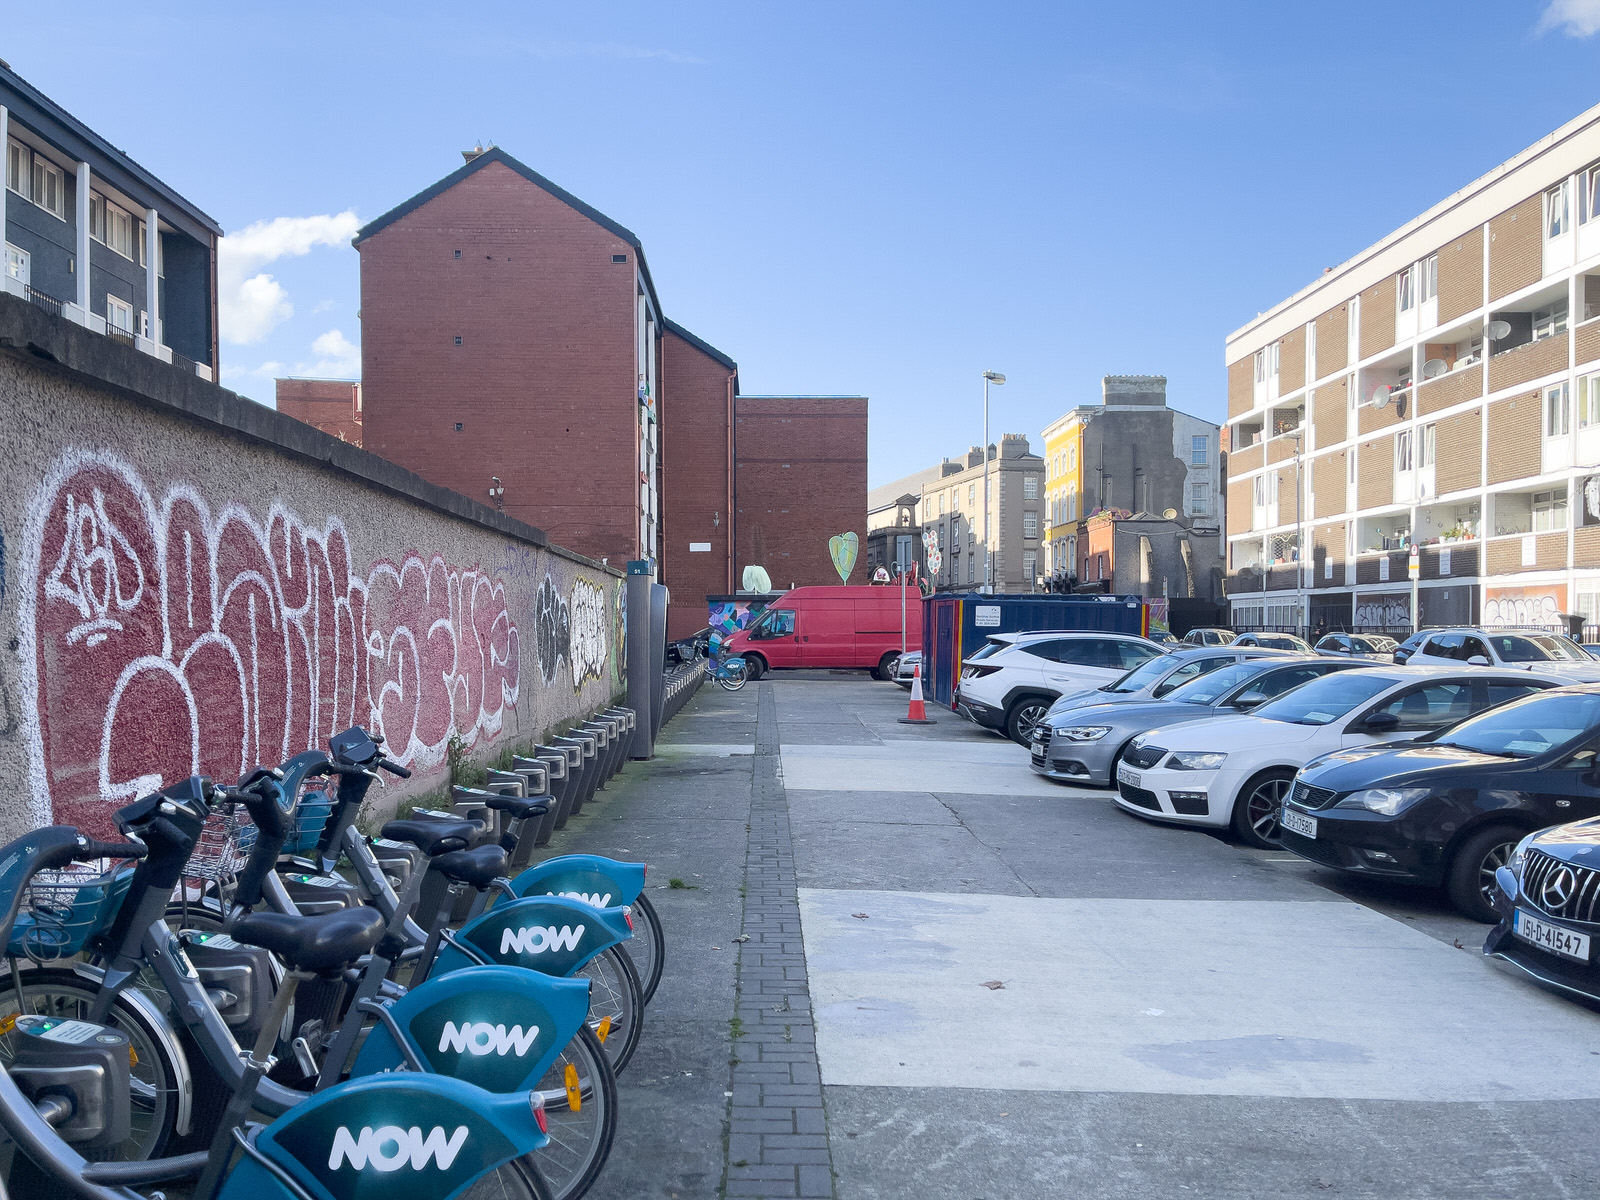 YORK STREET FLATS AND NEARBY [DUBLINBIKES DOCKING STATION 051 IS LOCATED HERE AND AUNGIER PLACE IS NEARBY]
 004